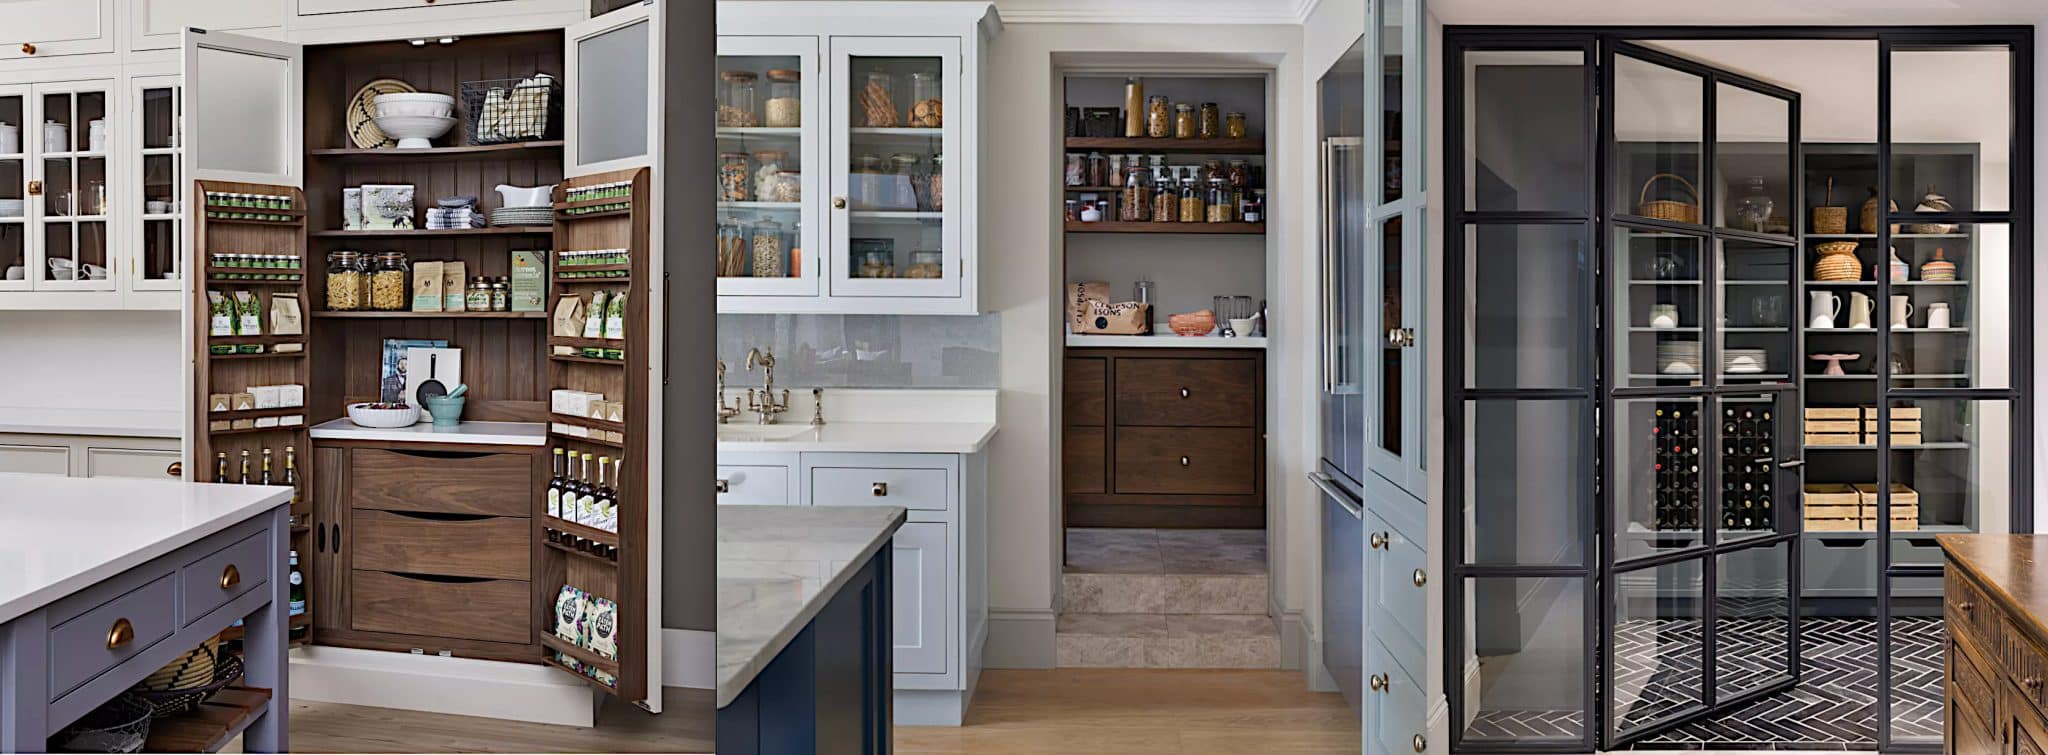 How to Select the Right Flooring for a Fancy Pantry Space